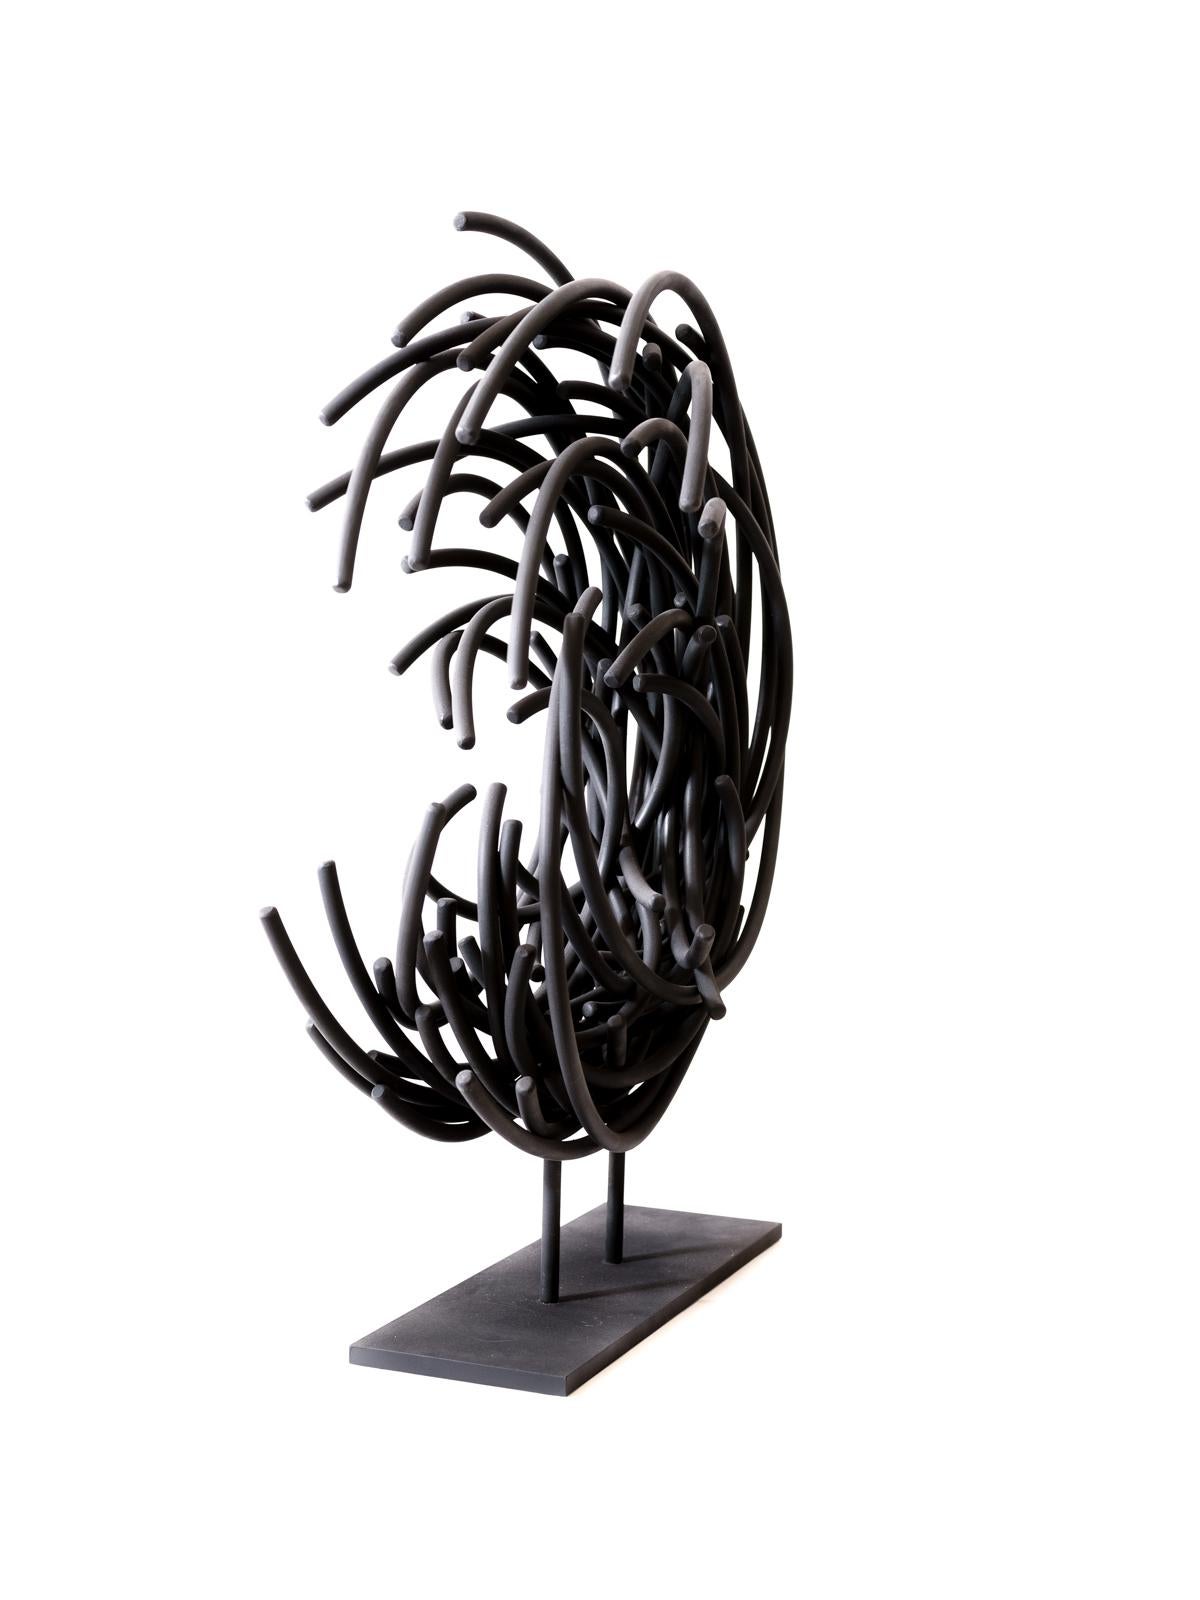 Maelstrom Series No 4 - layered, intersecting, forged aluminum sculpture - Contemporary Sculpture by Shayne Dark